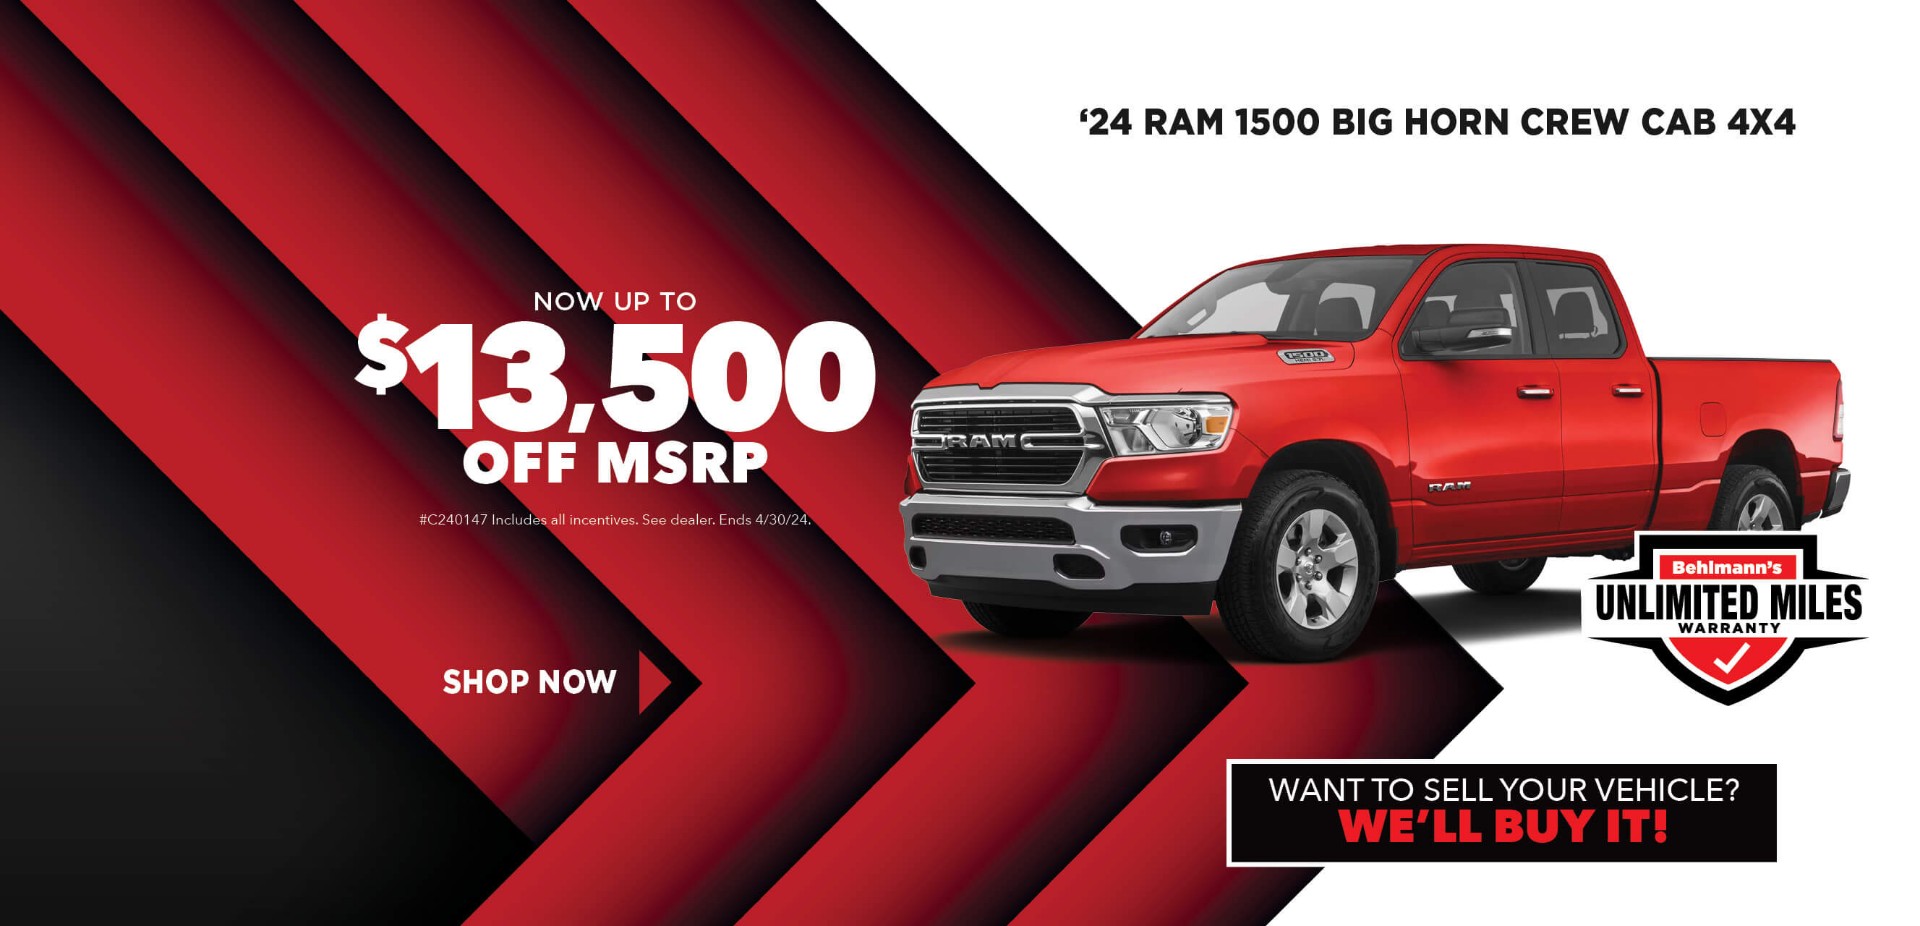 Red pickup truck on red background with advertising slogans: April Savings - Now up to $13,500 off MSRP on 2024 Ram 1500 Big Horn Crew 4x4.